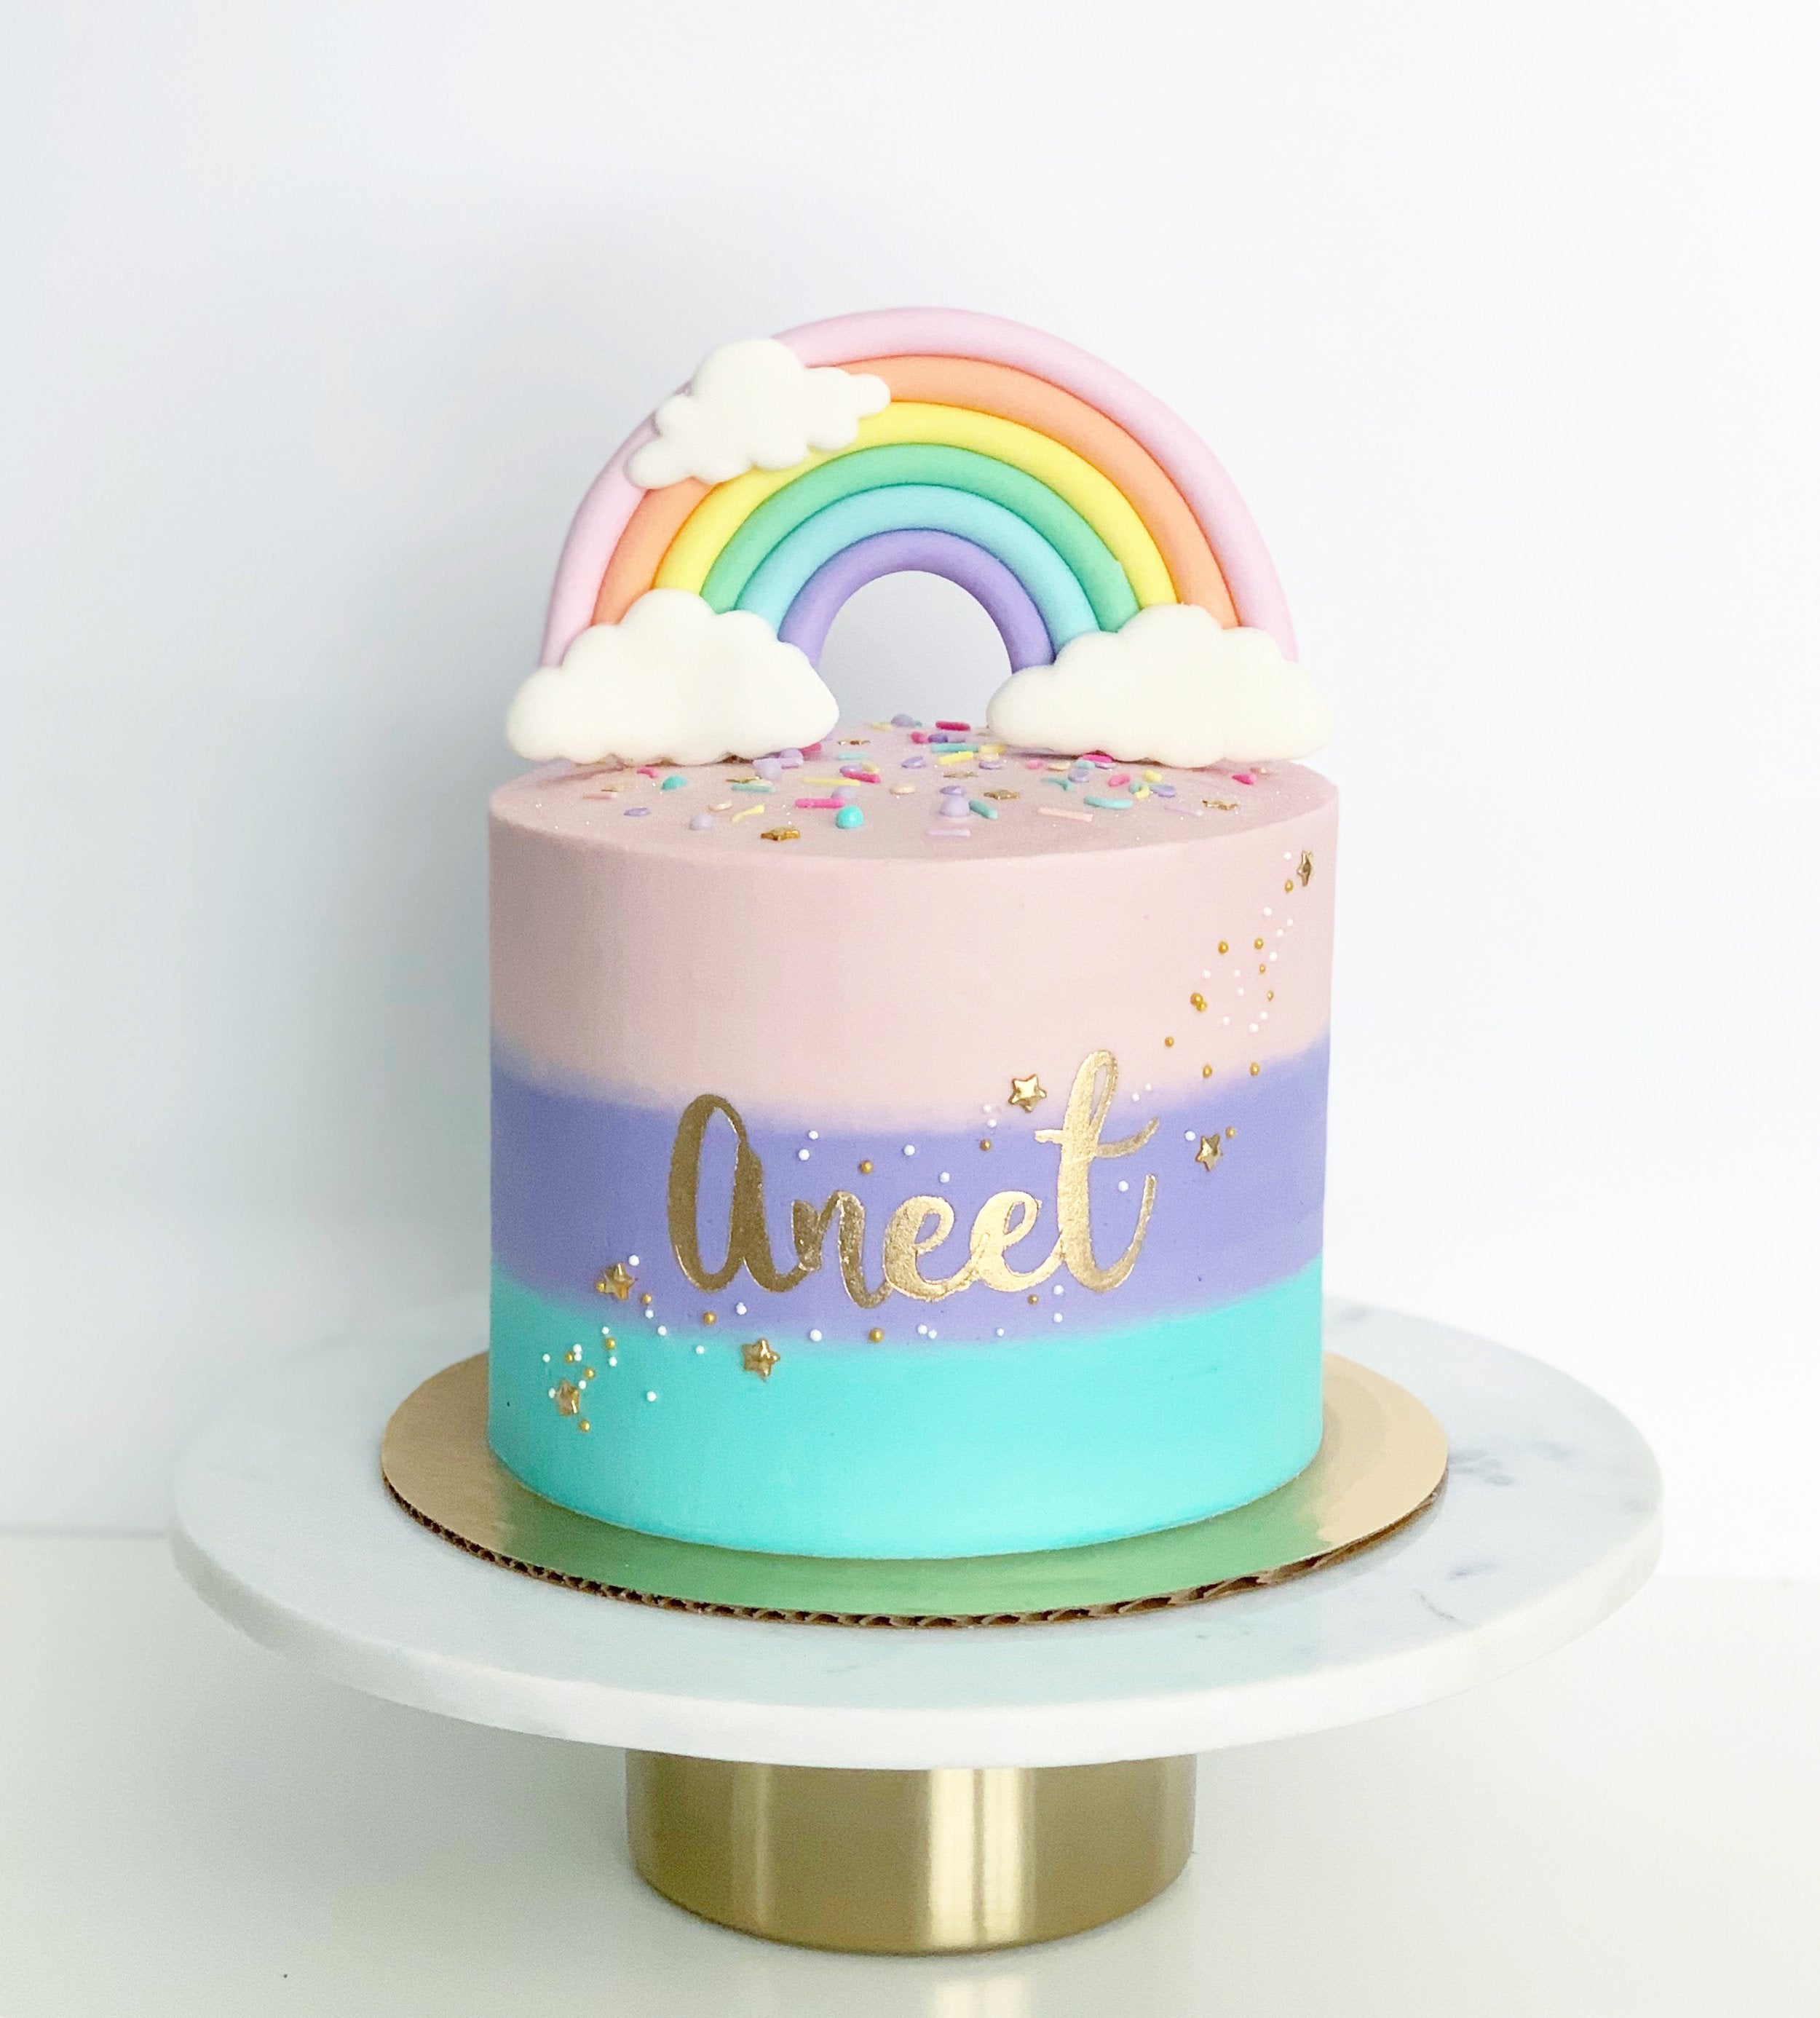 24 epic macaroon birthday cake ideas to inspire your next birthday  celebrations | Bunnies | Beauty | Photoshoot | All the stuff I care about